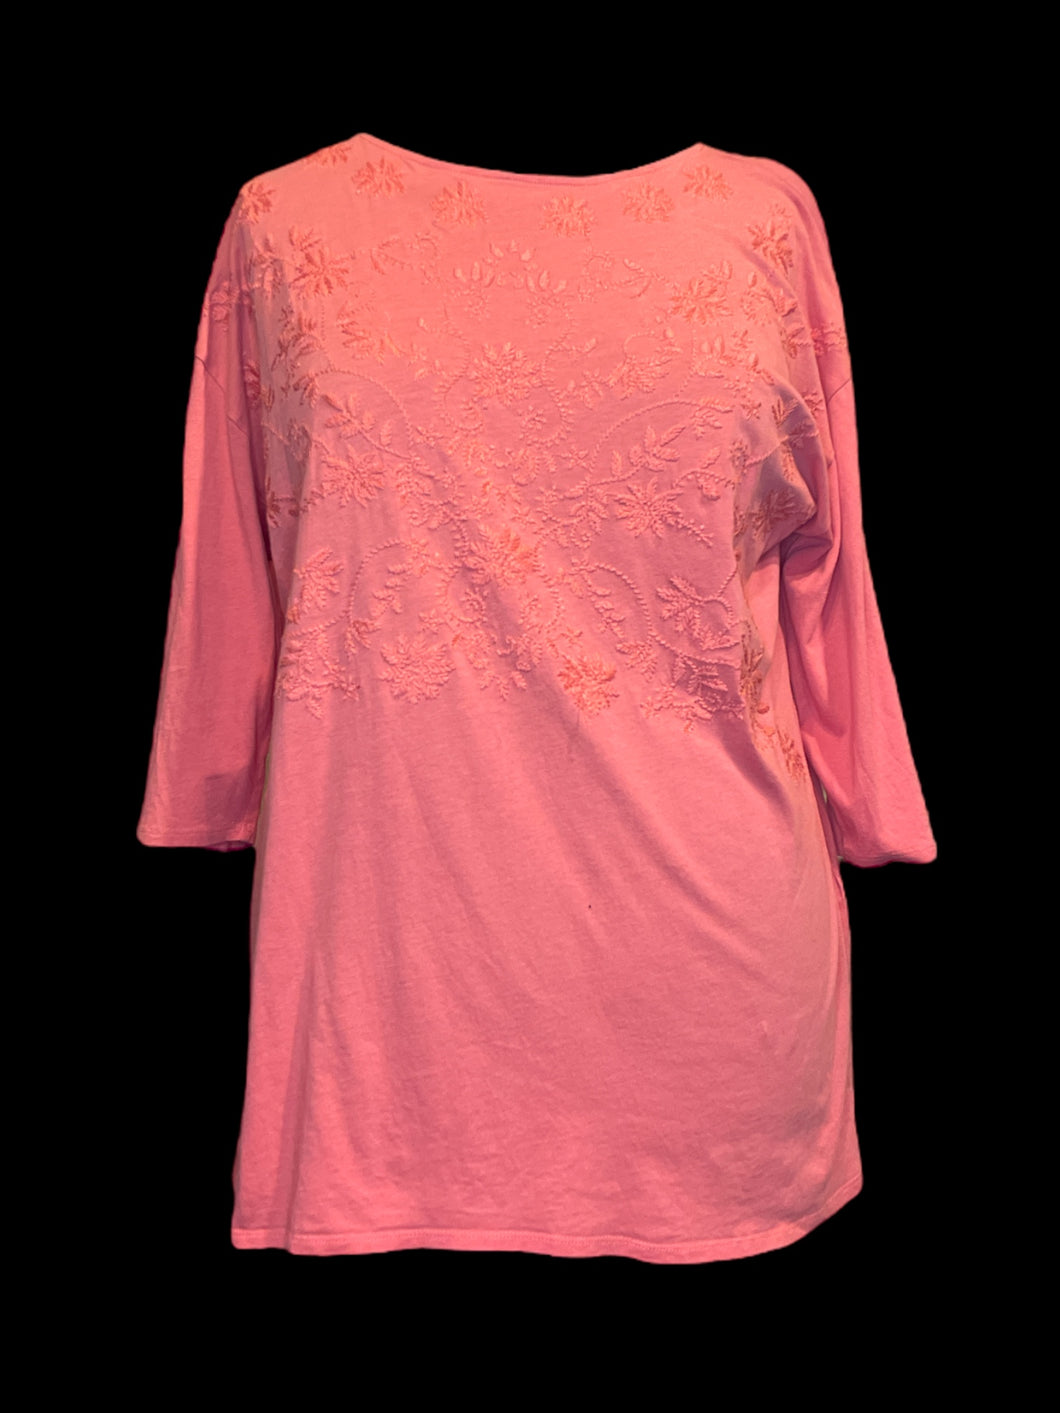 2X Pink 3/4 sleeve drop shoulder cotton-blend top w/ floral embroidery